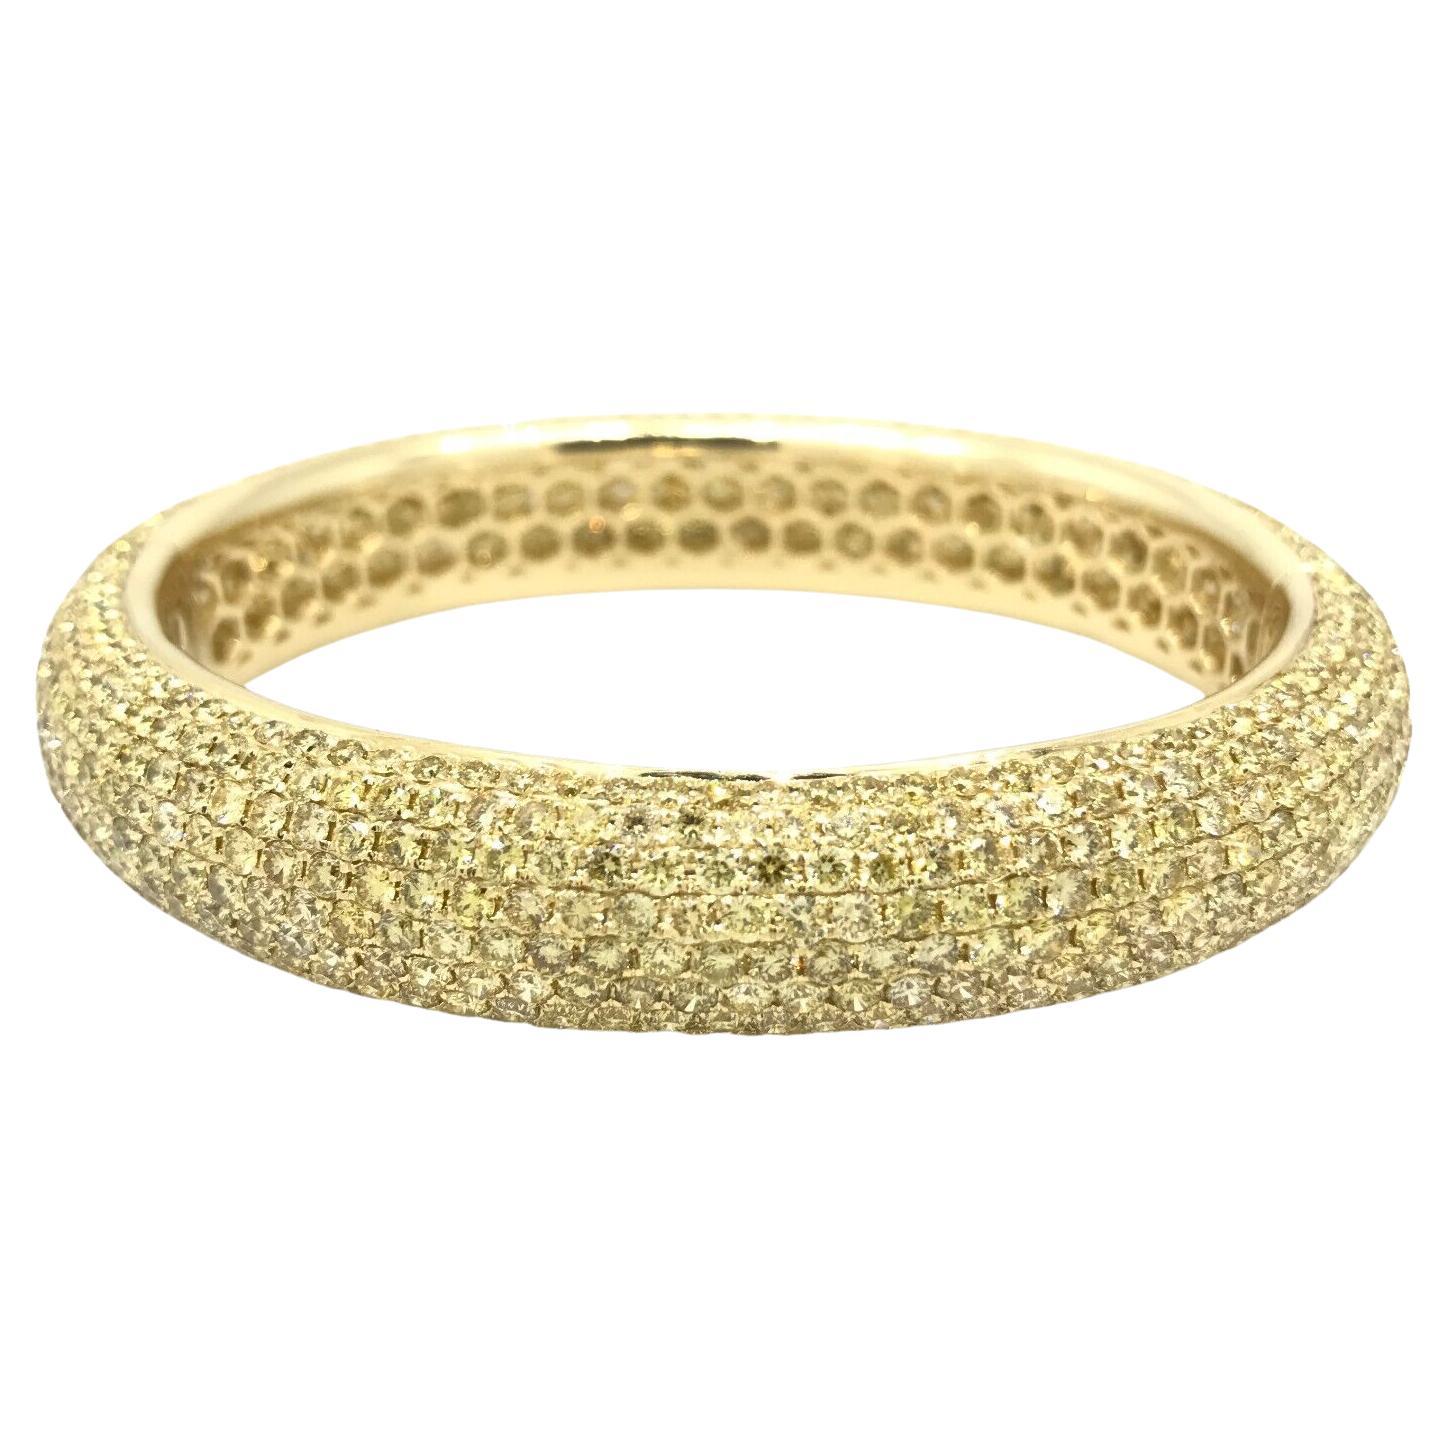 Natural Yellow Diamond Pave Eternity Bracelet 24.36 Carats in 18k Yellow Gold For Sale